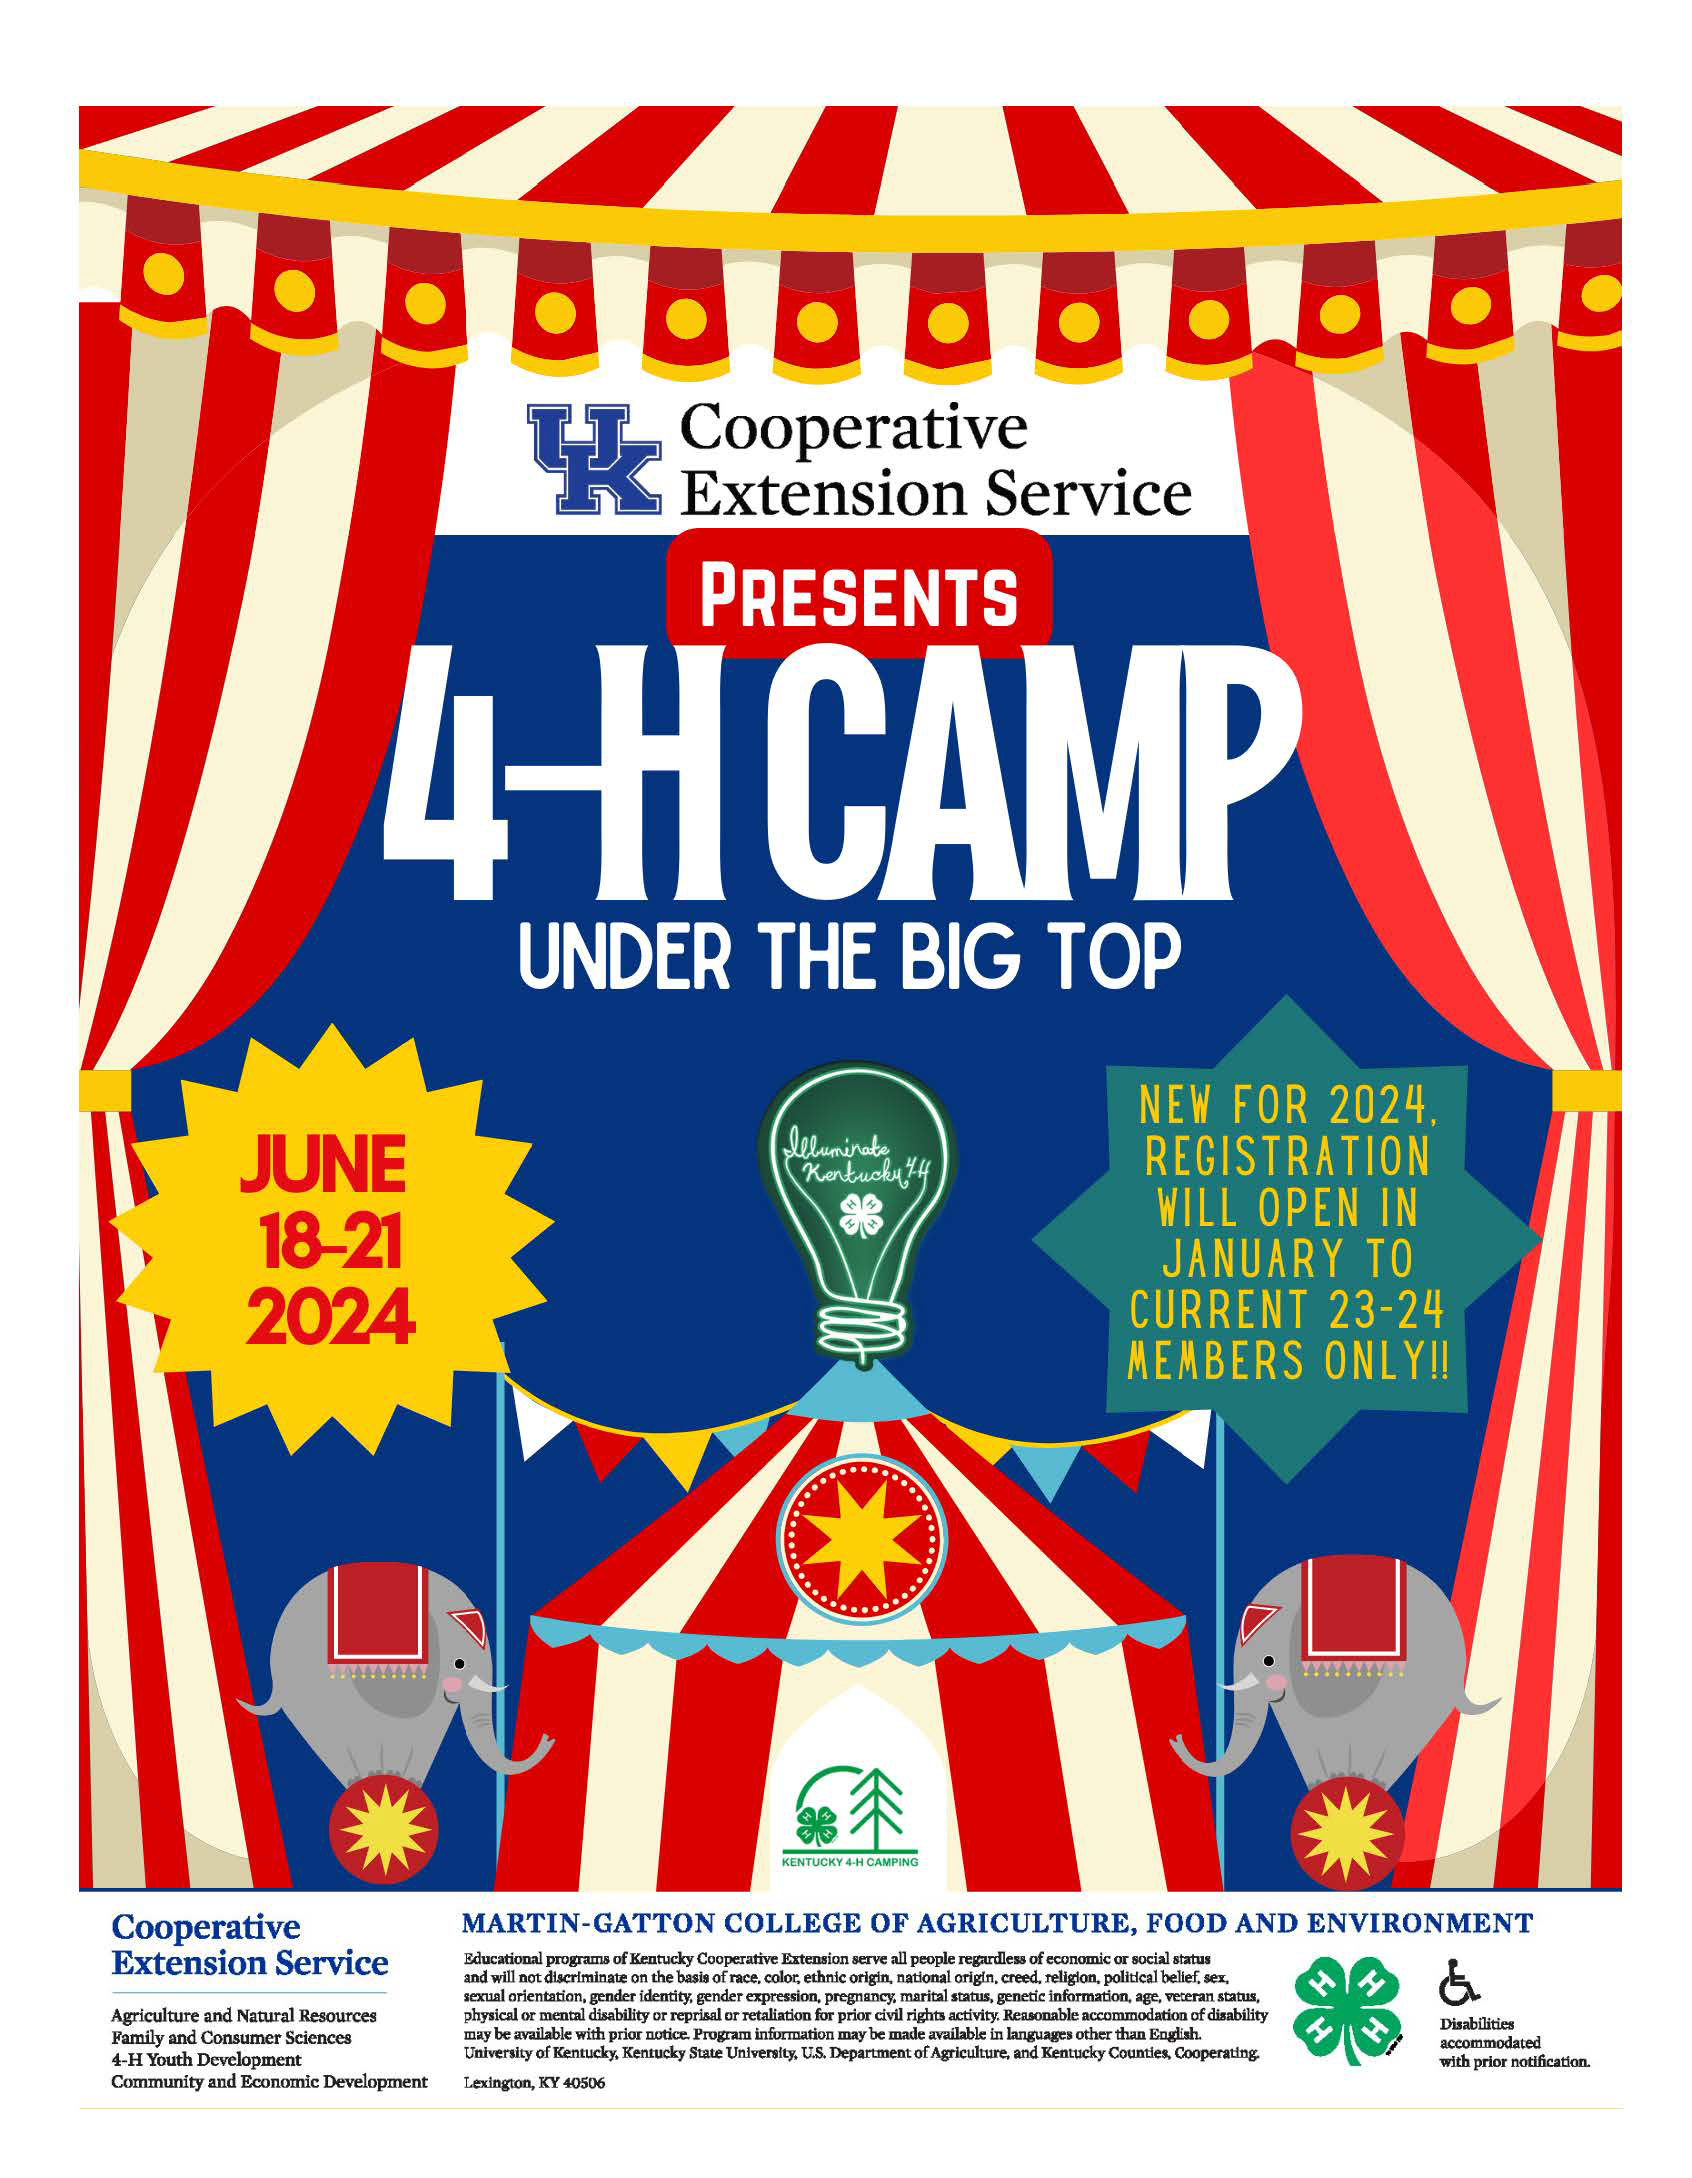 4-H Camp flyer red white circus tent big top themed banners and elephants